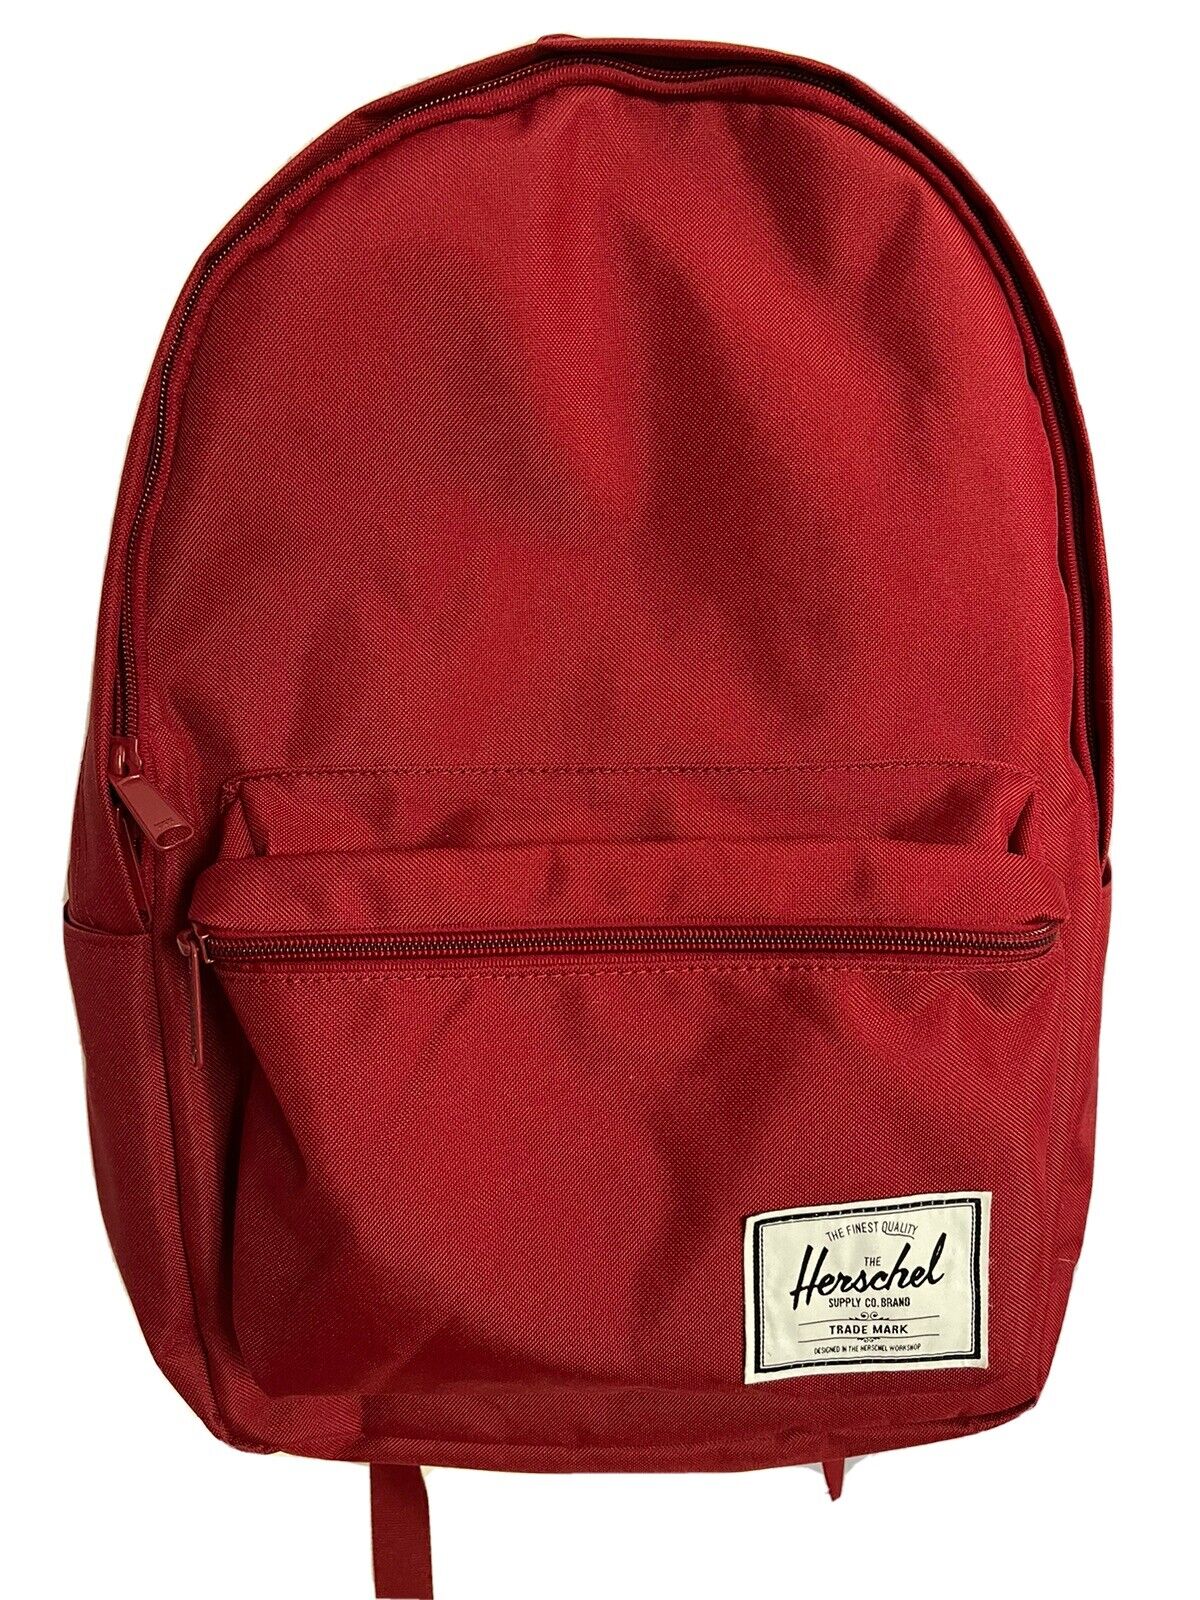 Herschel Supply Company: Classic XL Backpack. DEEP RED. Authentic. Never Used.